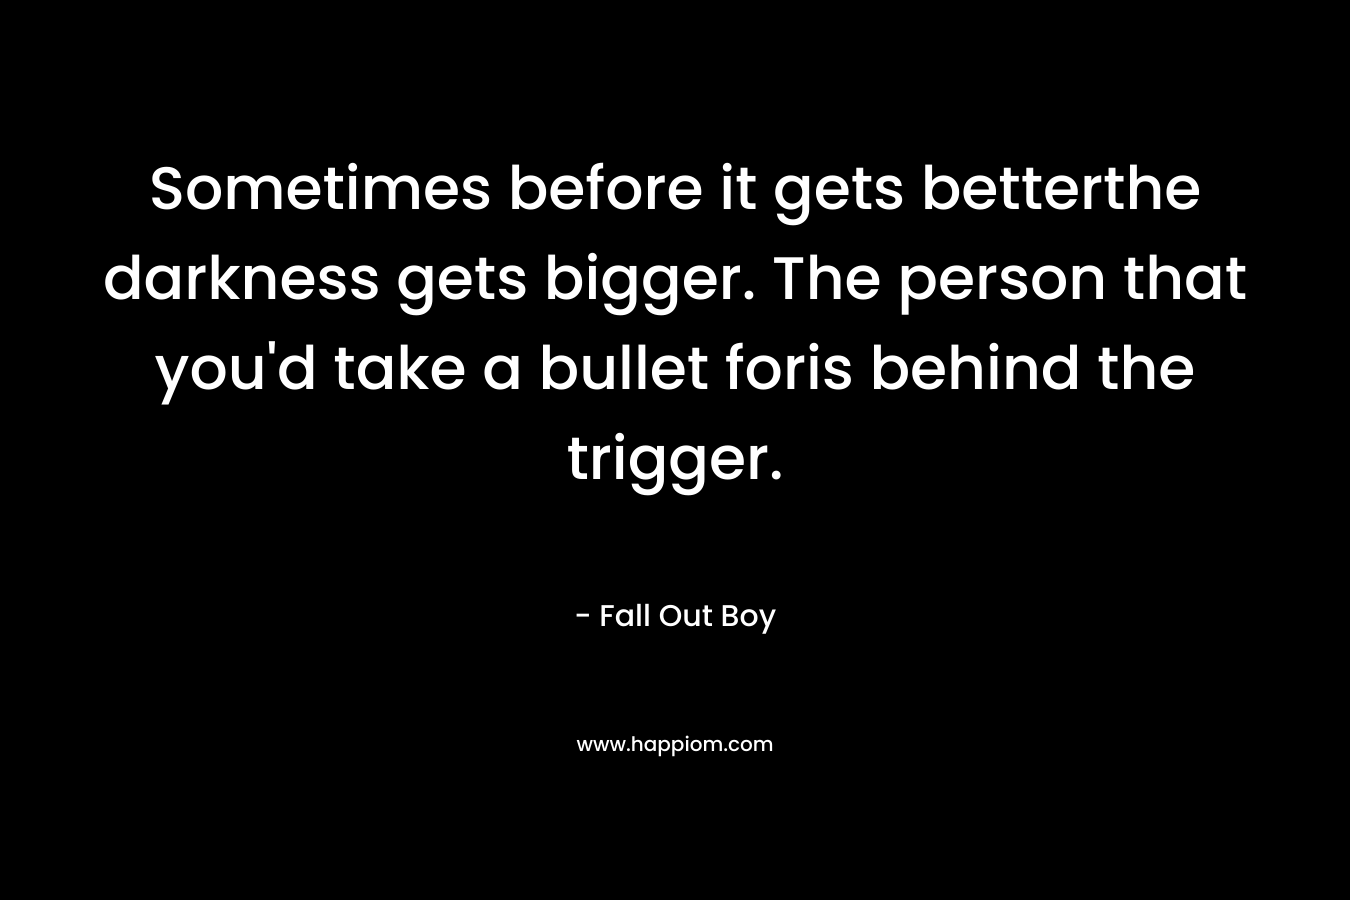 Sometimes before it gets betterthe darkness gets bigger. The person that you'd take a bullet foris behind the trigger.